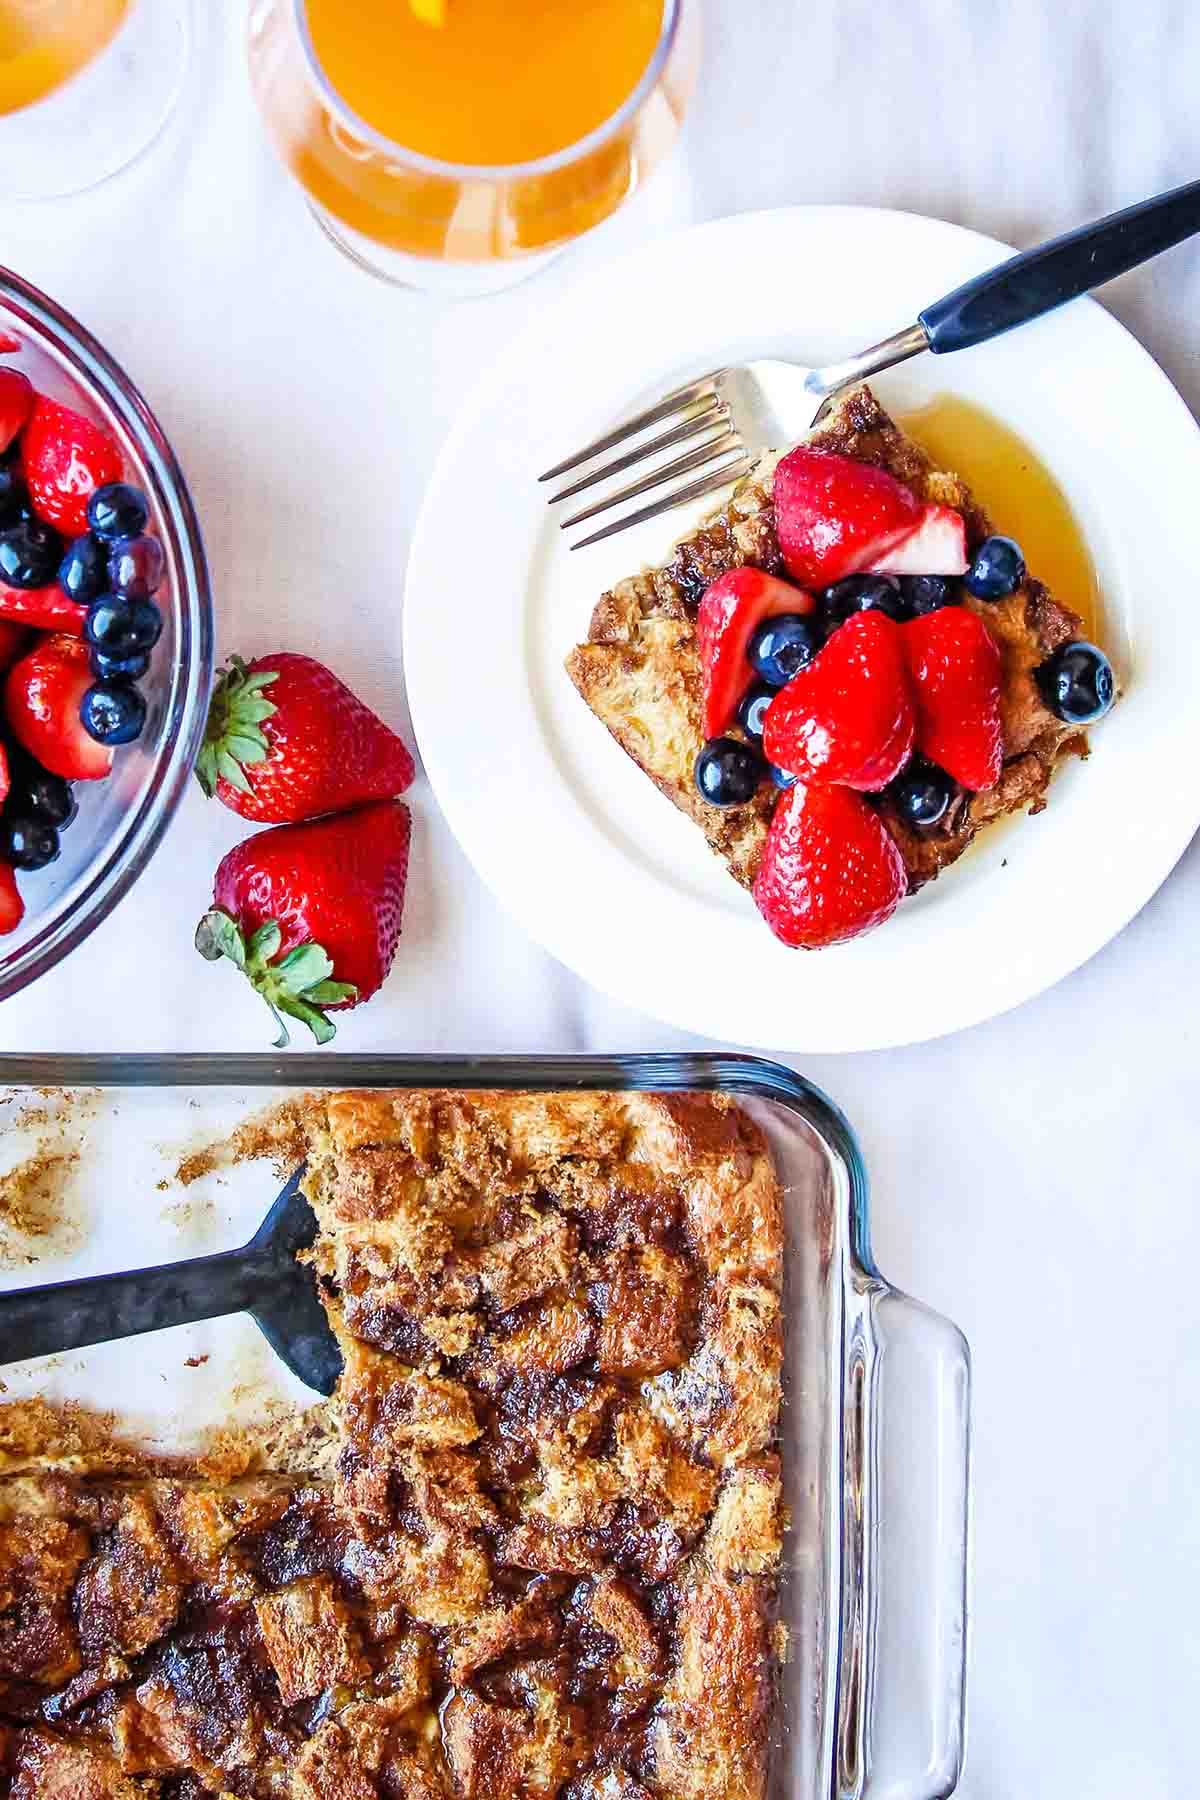 Oven french toast in glass dish and plated serving with berries